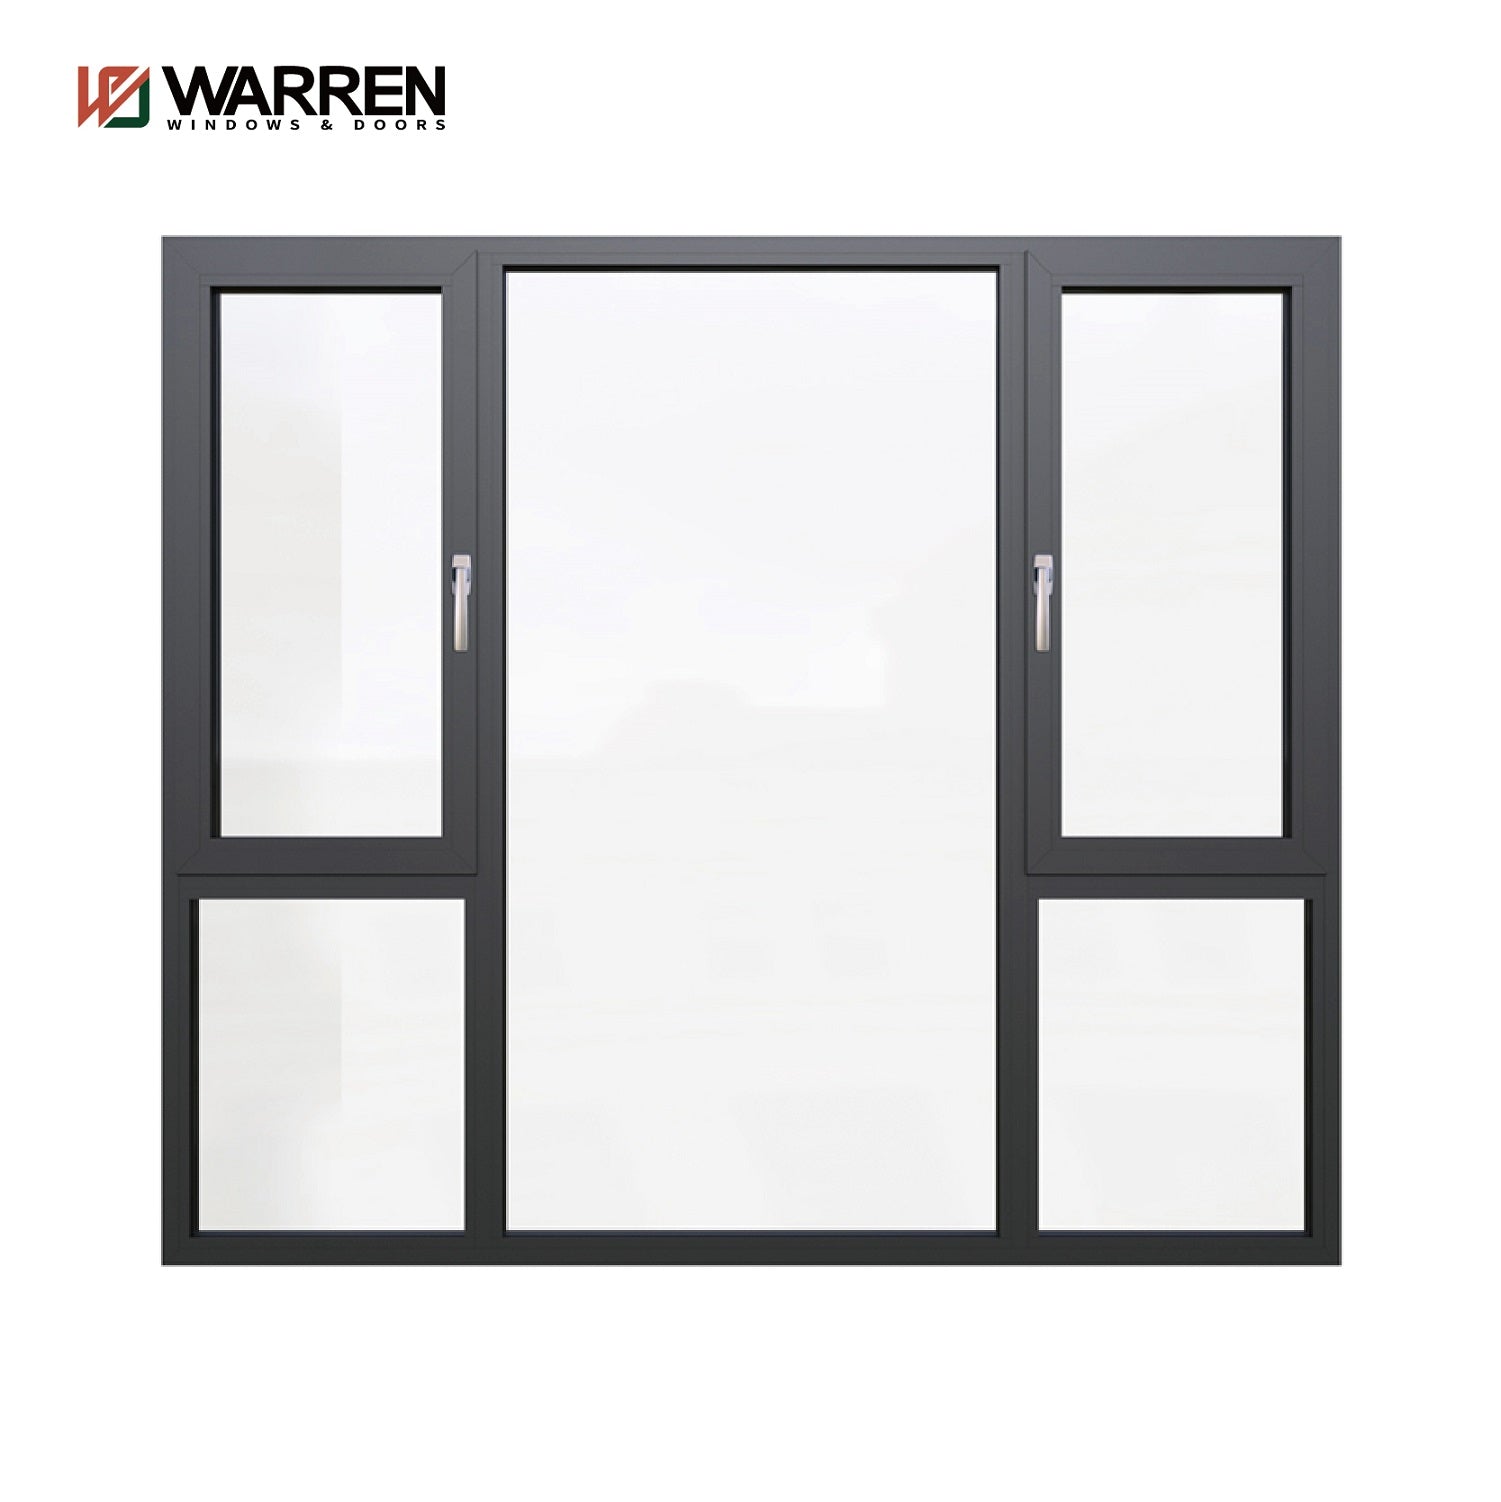 Warren Tilt And Turn Window China Customized Detroit Excellent Quality Grill Design Triple Glazed LOW-E Glass Windows